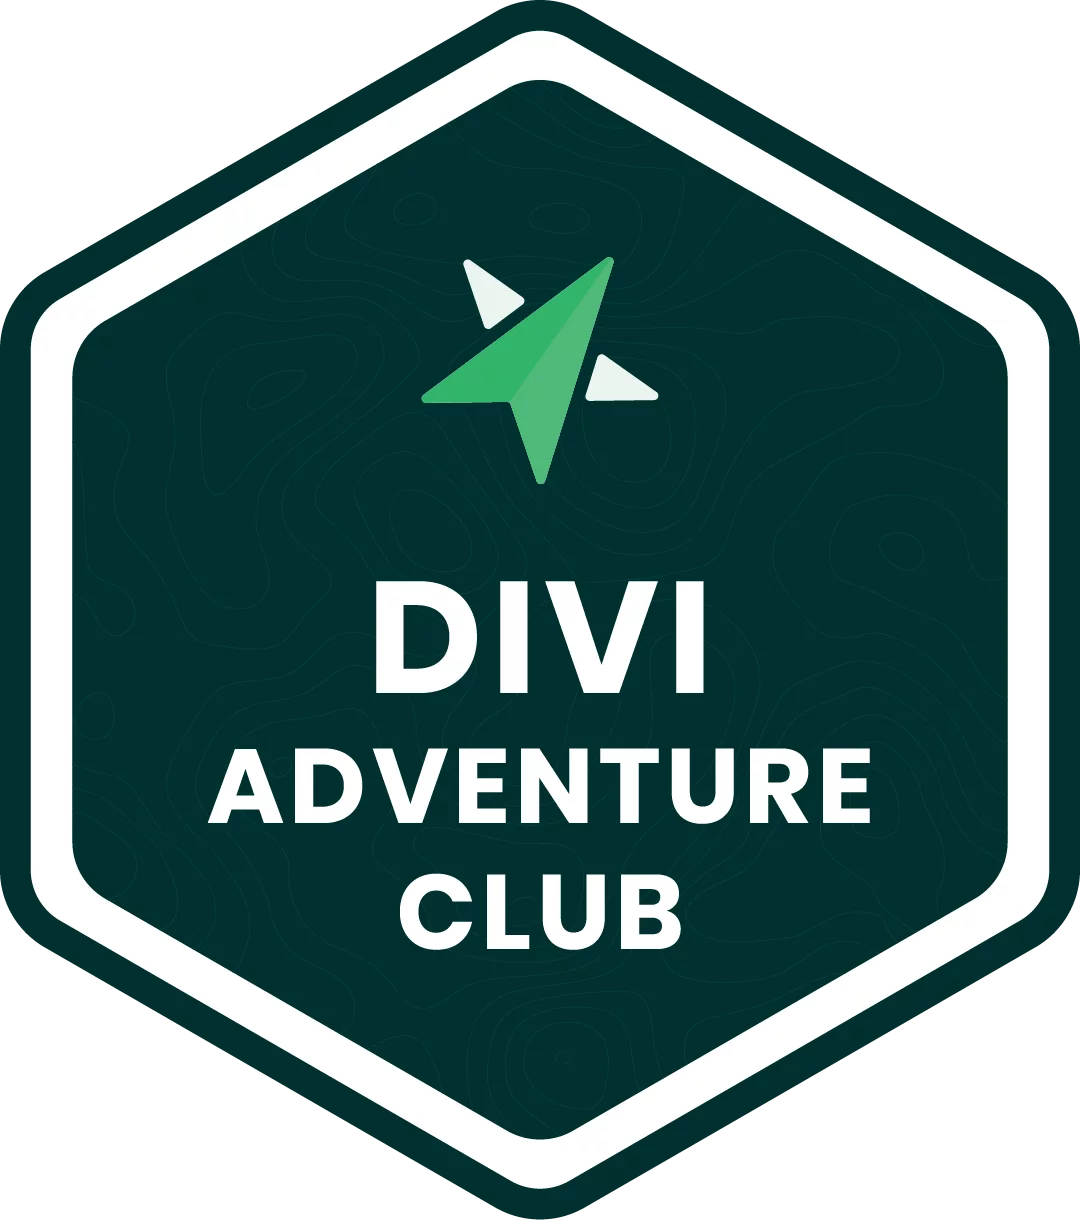 Divi Adventure Club Product And Course Membership by Pee Aye Creative